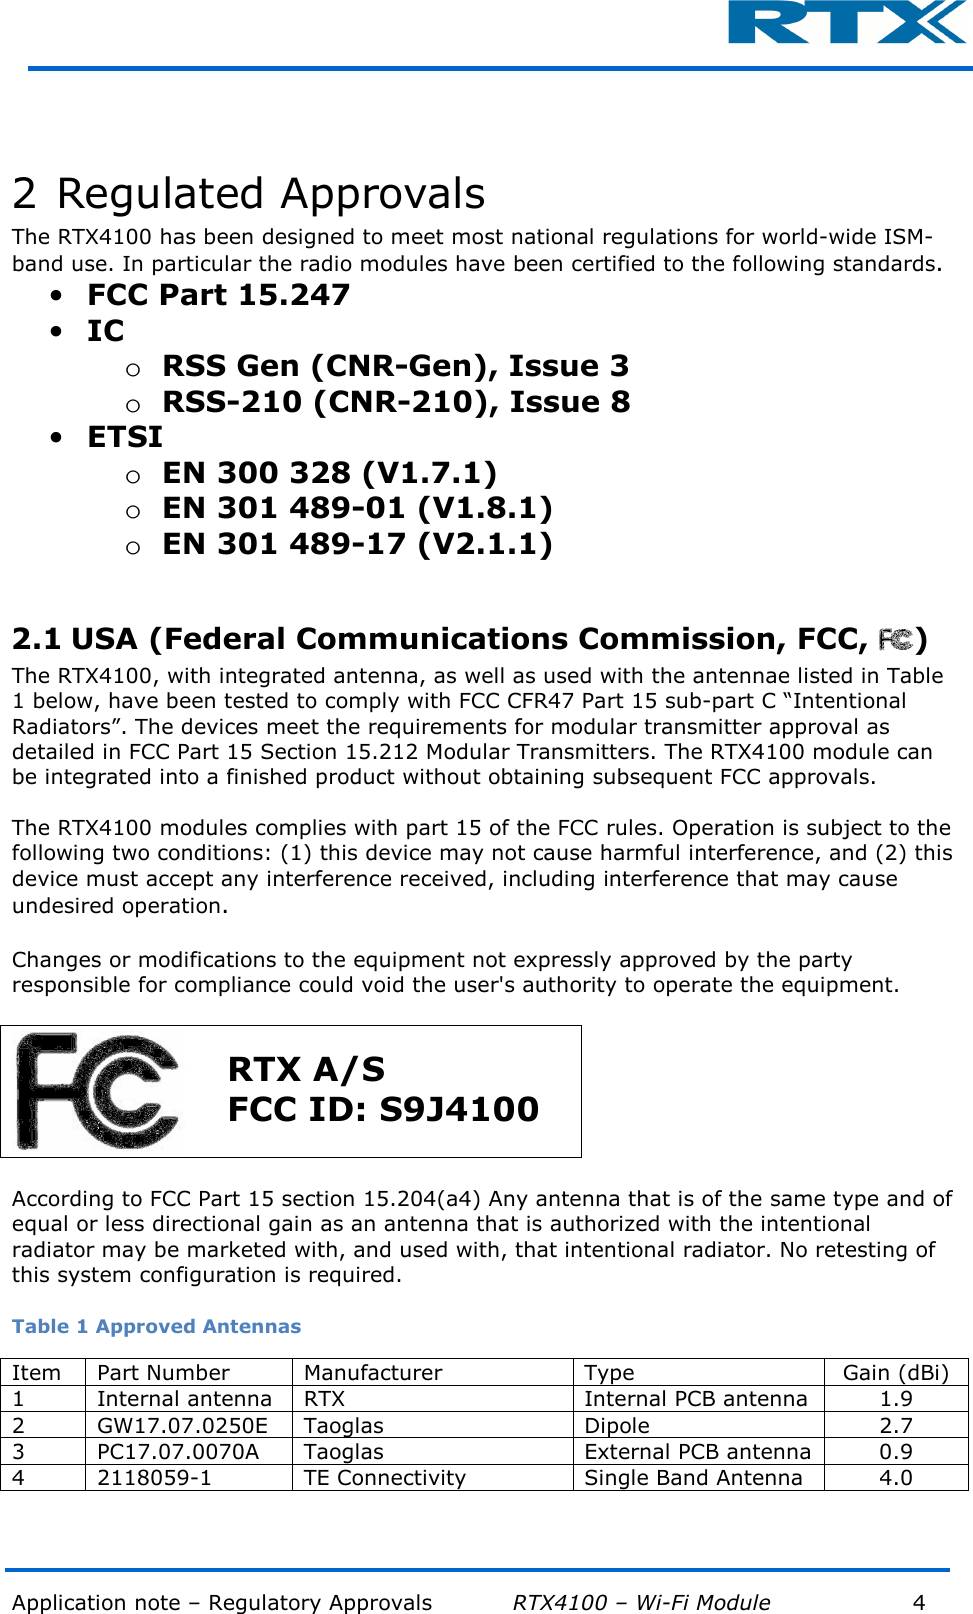  Application note – Regulatory Approvals           RTX4100 – Wi-Fi Module            4          2 Regulated Approvals The RTX4100 has been designed to meet most national regulations for world-wide ISM-band use. In particular the radio modules have been certified to the following standards. • FCC Part 15.247 • IC  o RSS Gen (CNR-Gen), Issue 3 o RSS-210 (CNR-210), Issue 8 • ETSI  o EN 300 328 (V1.7.1) o EN 301 489-01 (V1.8.1) o EN 301 489-17 (V2.1.1)  2.1 USA (Federal Communications Commission, FCC,  ) The RTX4100, with integrated antenna, as well as used with the antennae listed in Table 1 below, have been tested to comply with FCC CFR47 Part 15 sub-part C “Intentional Radiators”. The devices meet the requirements for modular transmitter approval as detailed in FCC Part 15 Section 15.212 Modular Transmitters. The RTX4100 module can be integrated into a finished product without obtaining subsequent FCC approvals.  The RTX4100 modules complies with part 15 of the FCC rules. Operation is subject to the following two conditions: (1) this device may not cause harmful interference, and (2) this device must accept any interference received, including interference that may cause undesired operation.  Changes or modifications to the equipment not expressly approved by the party responsible for compliance could void the user&apos;s authority to operate the equipment.   RTX A/S FCC ID: S9J4100   According to FCC Part 15 section 15.204(a4) Any antenna that is of the same type and of equal or less directional gain as an antenna that is authorized with the intentional radiator may be marketed with, and used with, that intentional radiator. No retesting of this system configuration is required.   Table 1 Approved Antennas Item  Part Number  Manufacturer  Type  Gain (dBi) 1  Internal antenna  RTX  Internal PCB antenna  1.9 2  GW17.07.0250E  Taoglas  Dipole  2.7 3  PC17.07.0070A  Taoglas  External PCB antenna 0.9 4  2118059-1  TE Connectivity  Single Band Antenna  4.0  